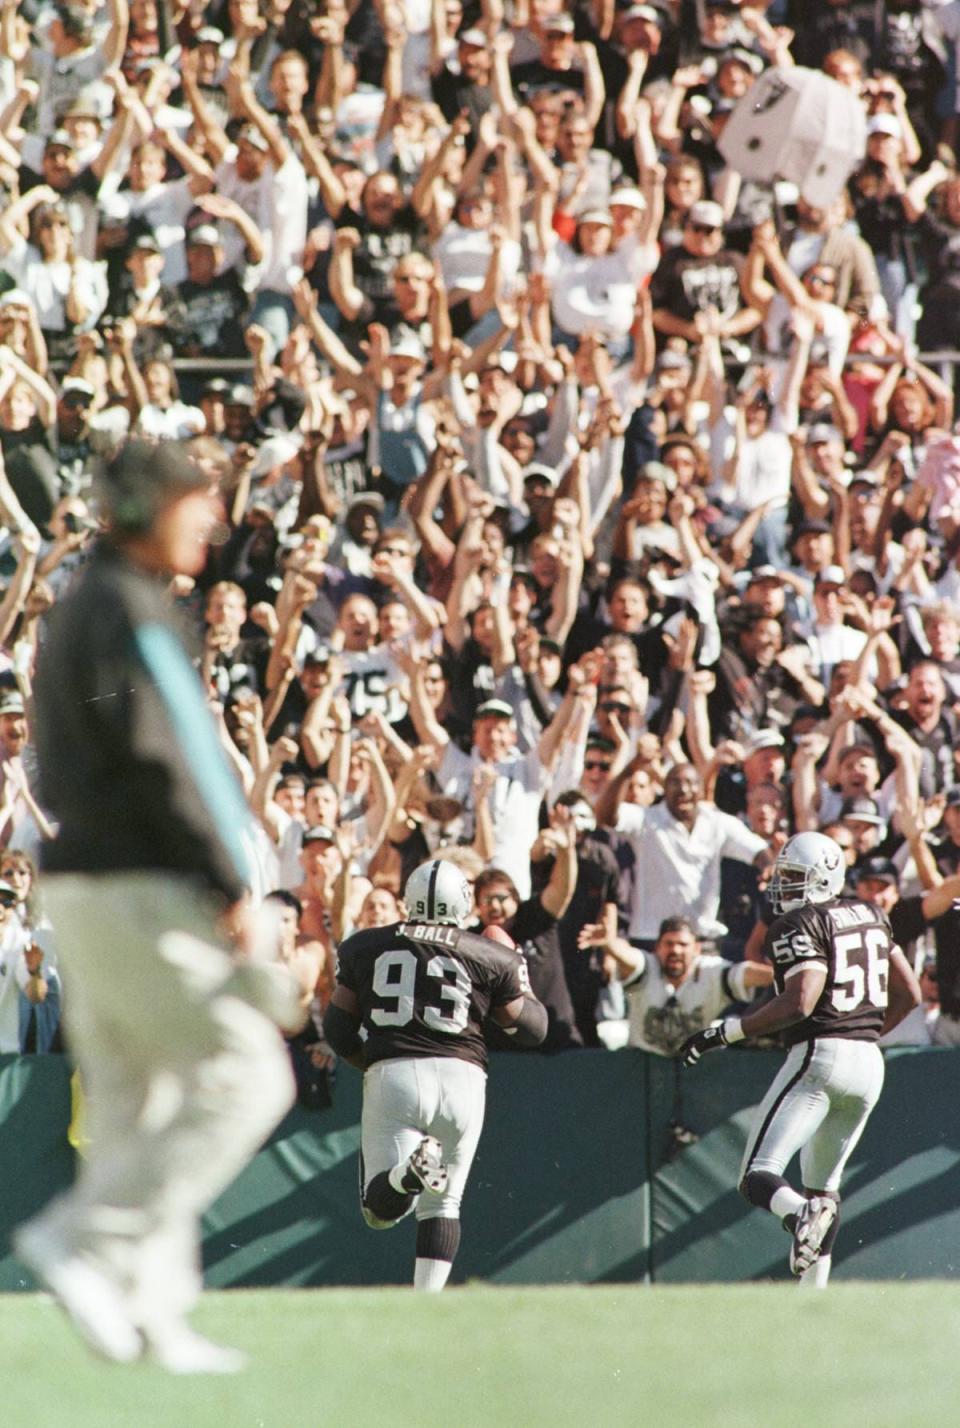 Oakland fans stand and cheer as Raiders defensive tackle Jerry Ball (93) runs into the end zone for a touchdown, after making an interception late in the fourth quarter of an NFL football game on September 15, 1996. Jaguars Head Coach Tom Coughlin, at left, stands frustrated on the field. [Rick Wilson/Florida Times-Union]